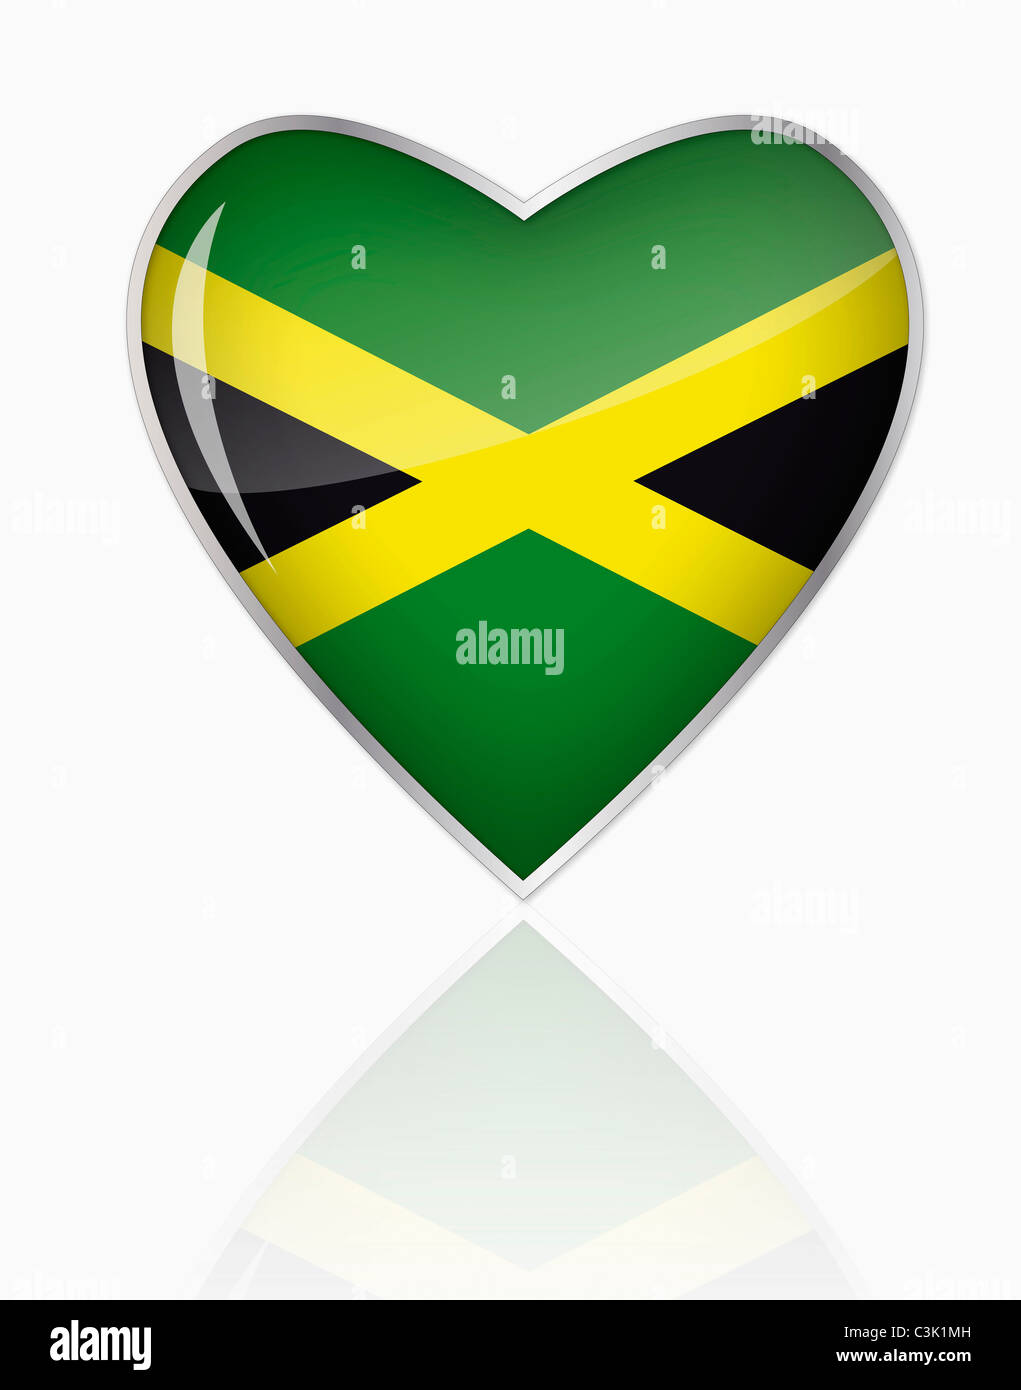 Jamaican flag in heart shape on white background Stock Photo